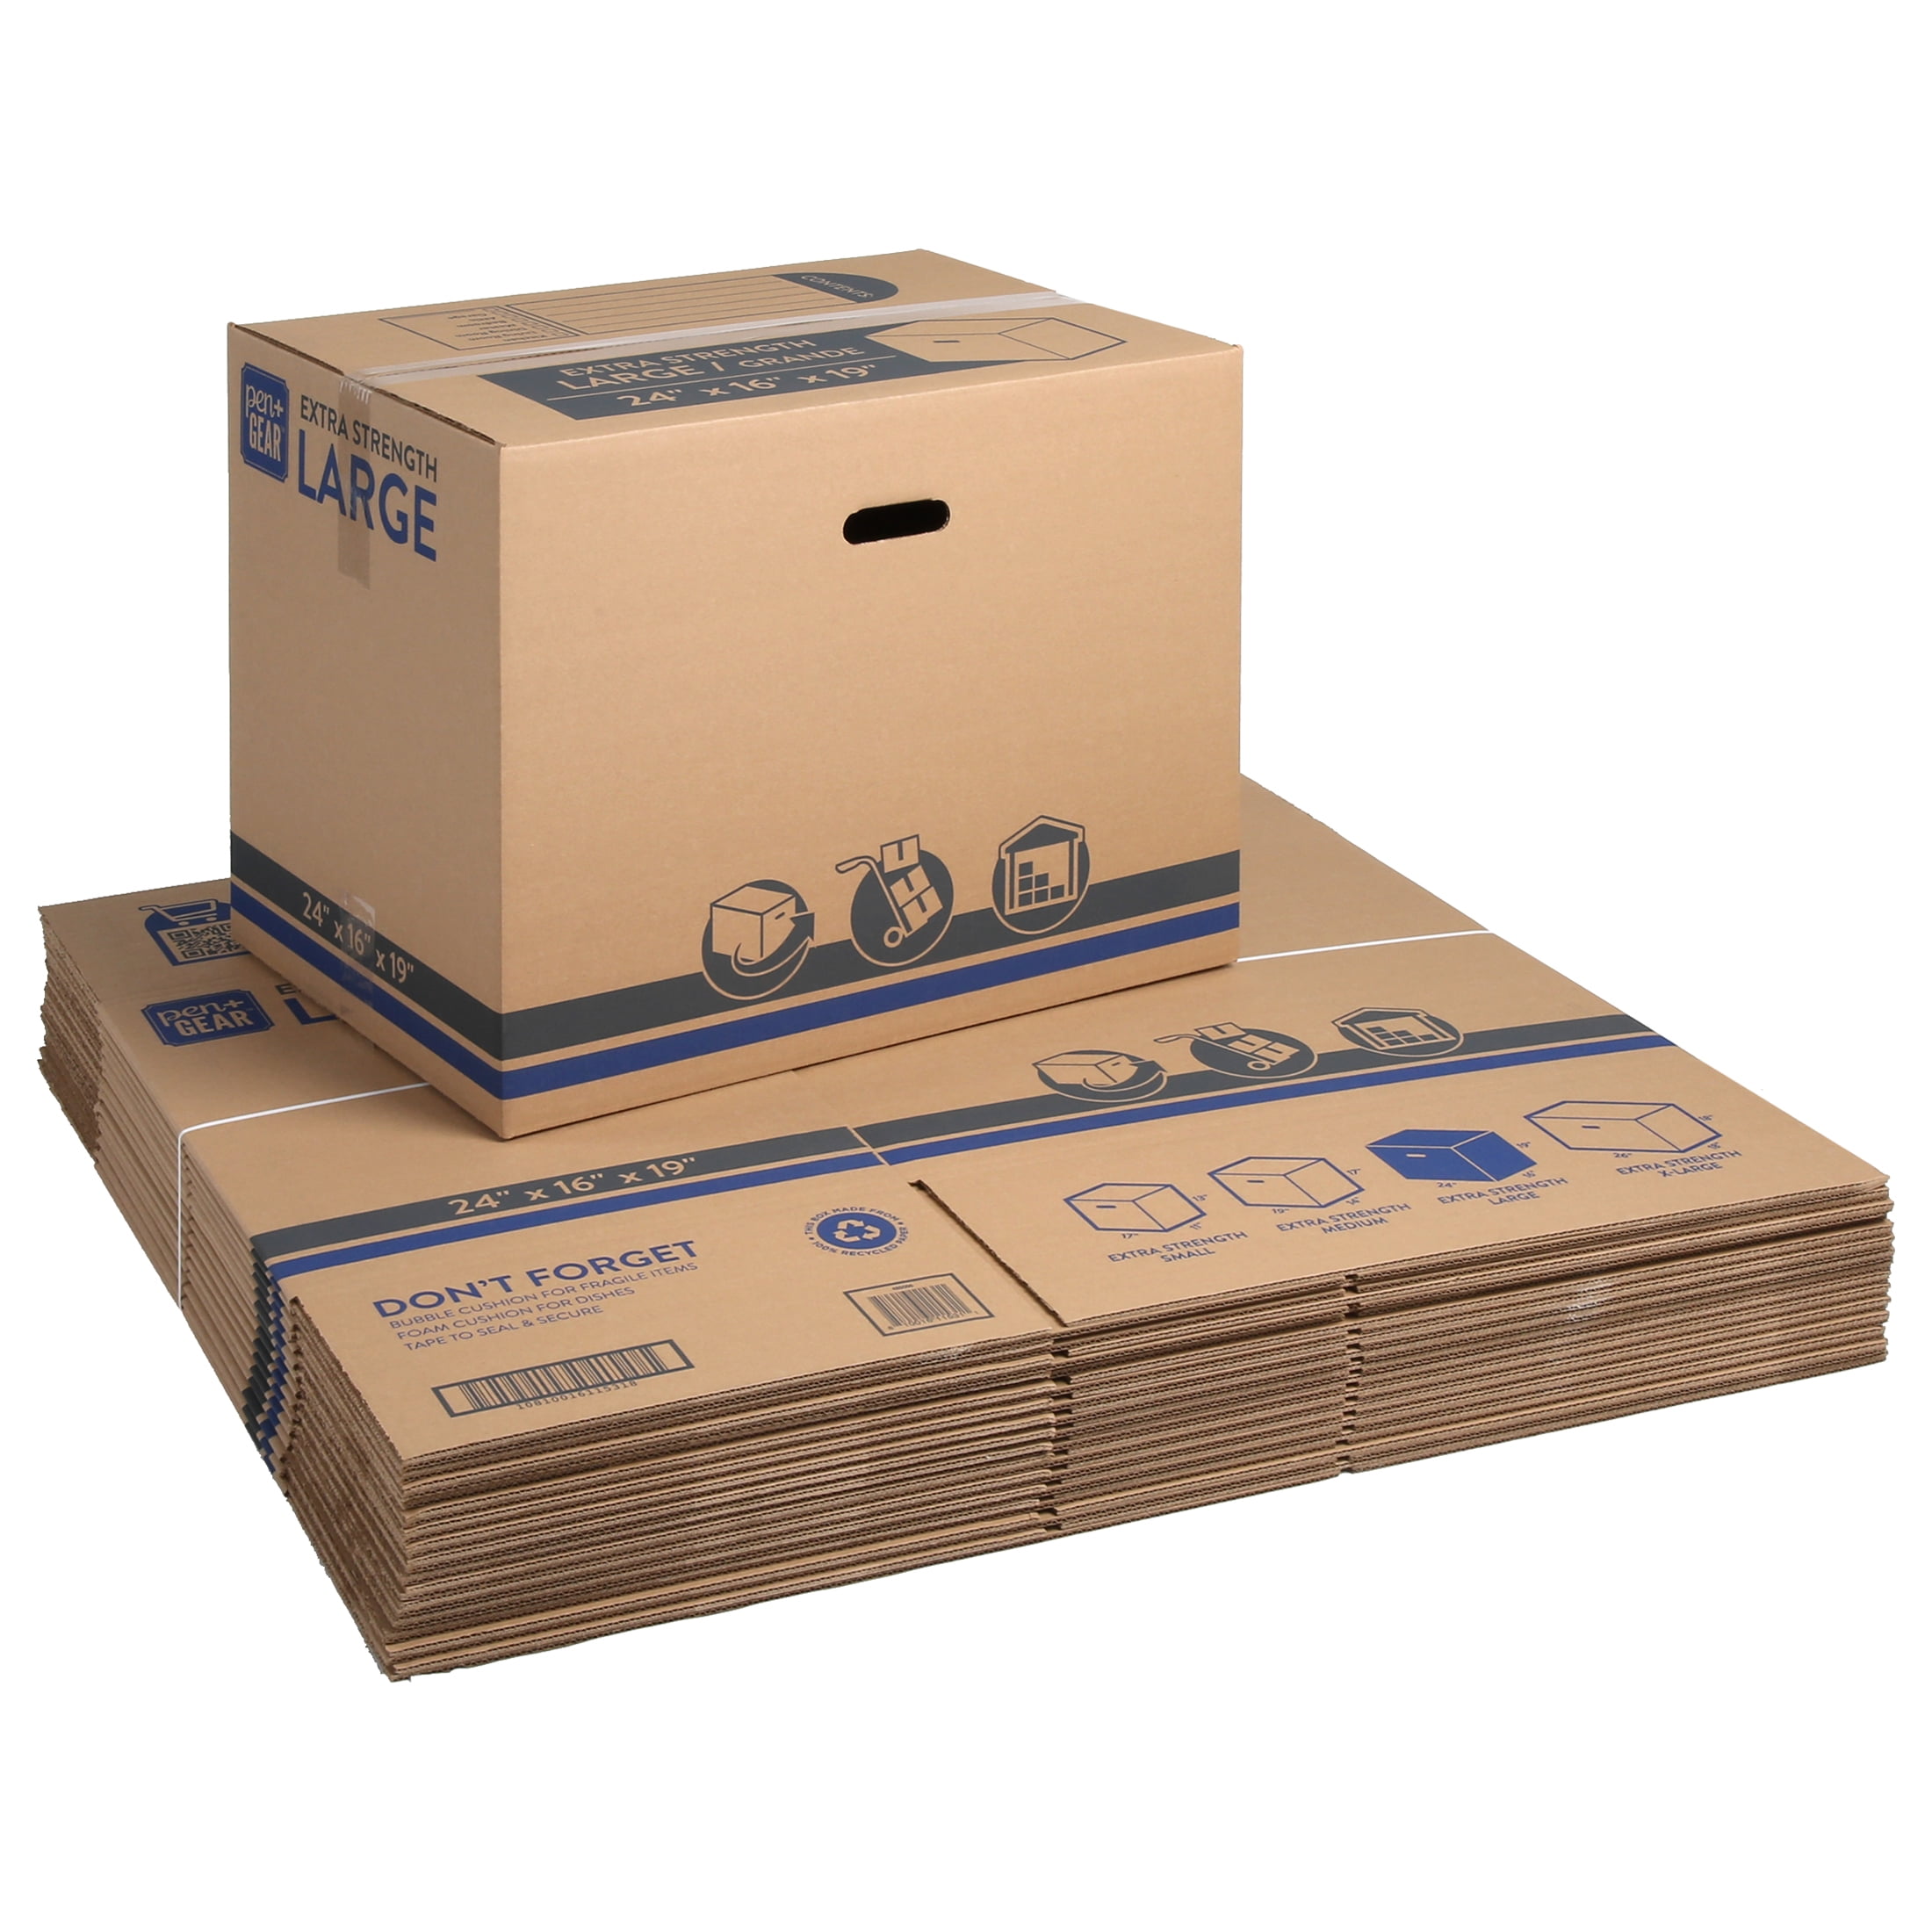 Moving and Storage Single Wall Corrugated for Packing Bundle of 25 Shipping BOX USA Cardboard Boxes 24 x 10 x 12 Inches